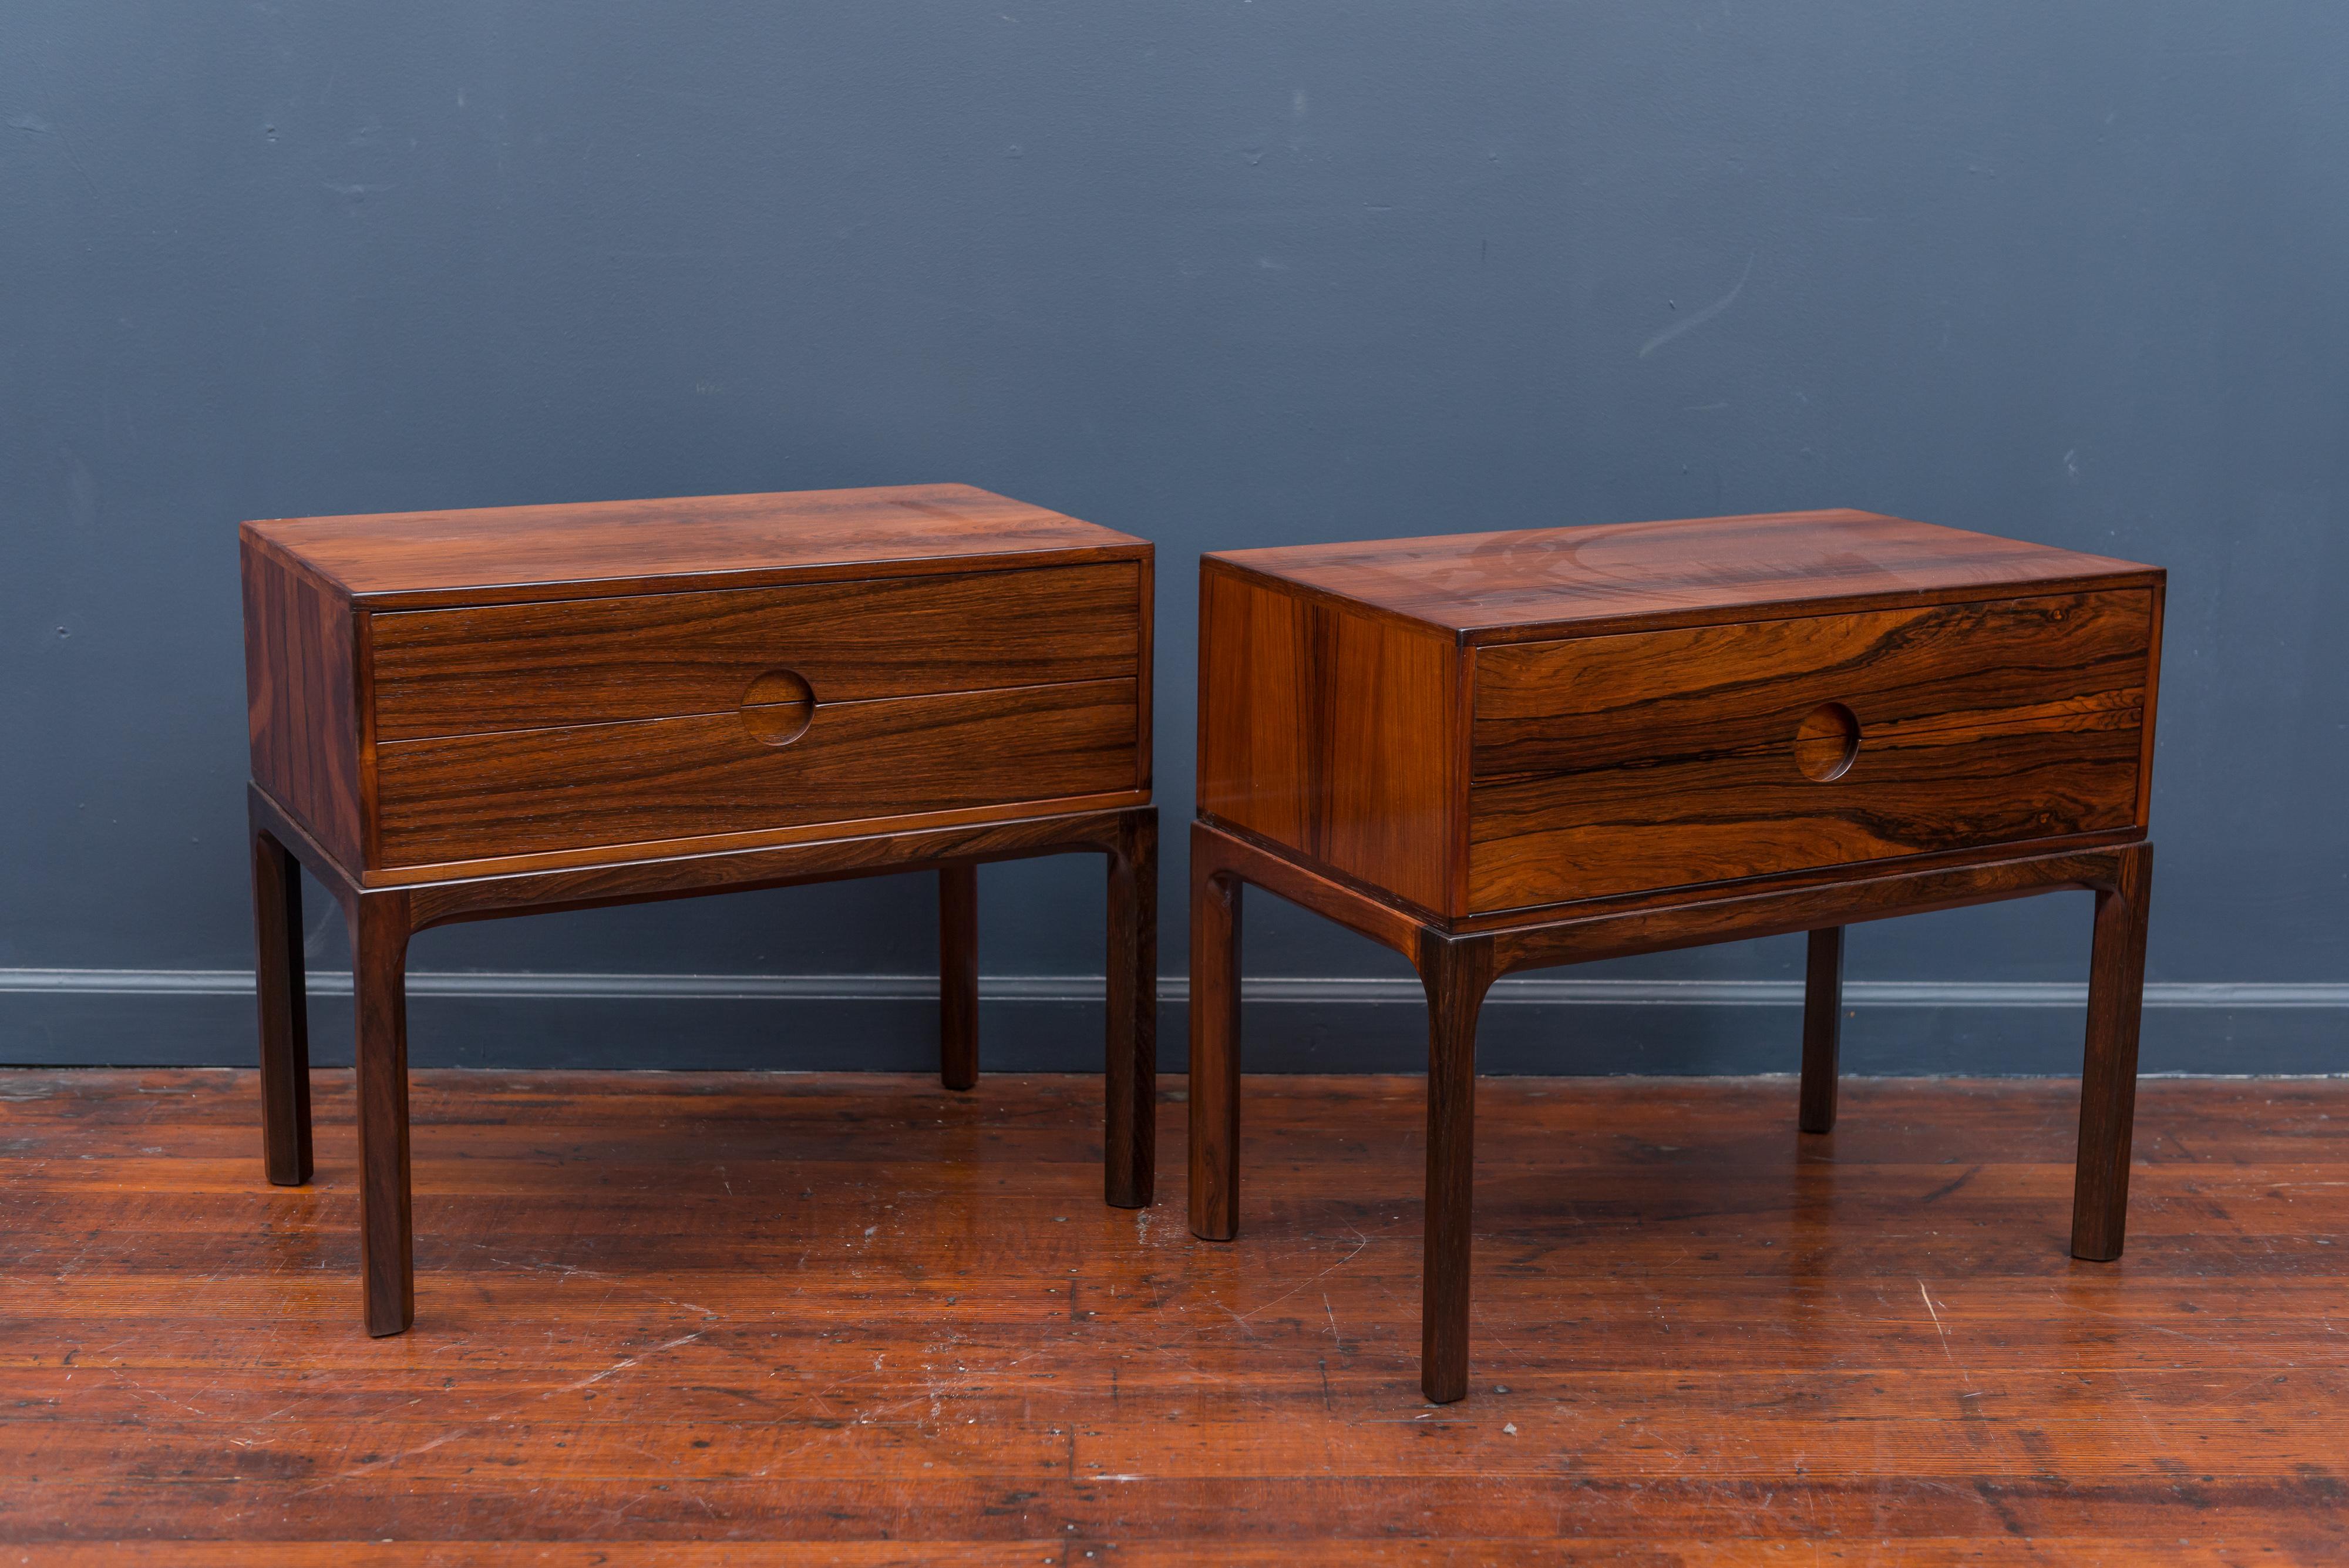 Pair of Askel Kjersgaard Danish rosewood nightstands or end tables for Odder, Denmark. Newly refinished and labelled.